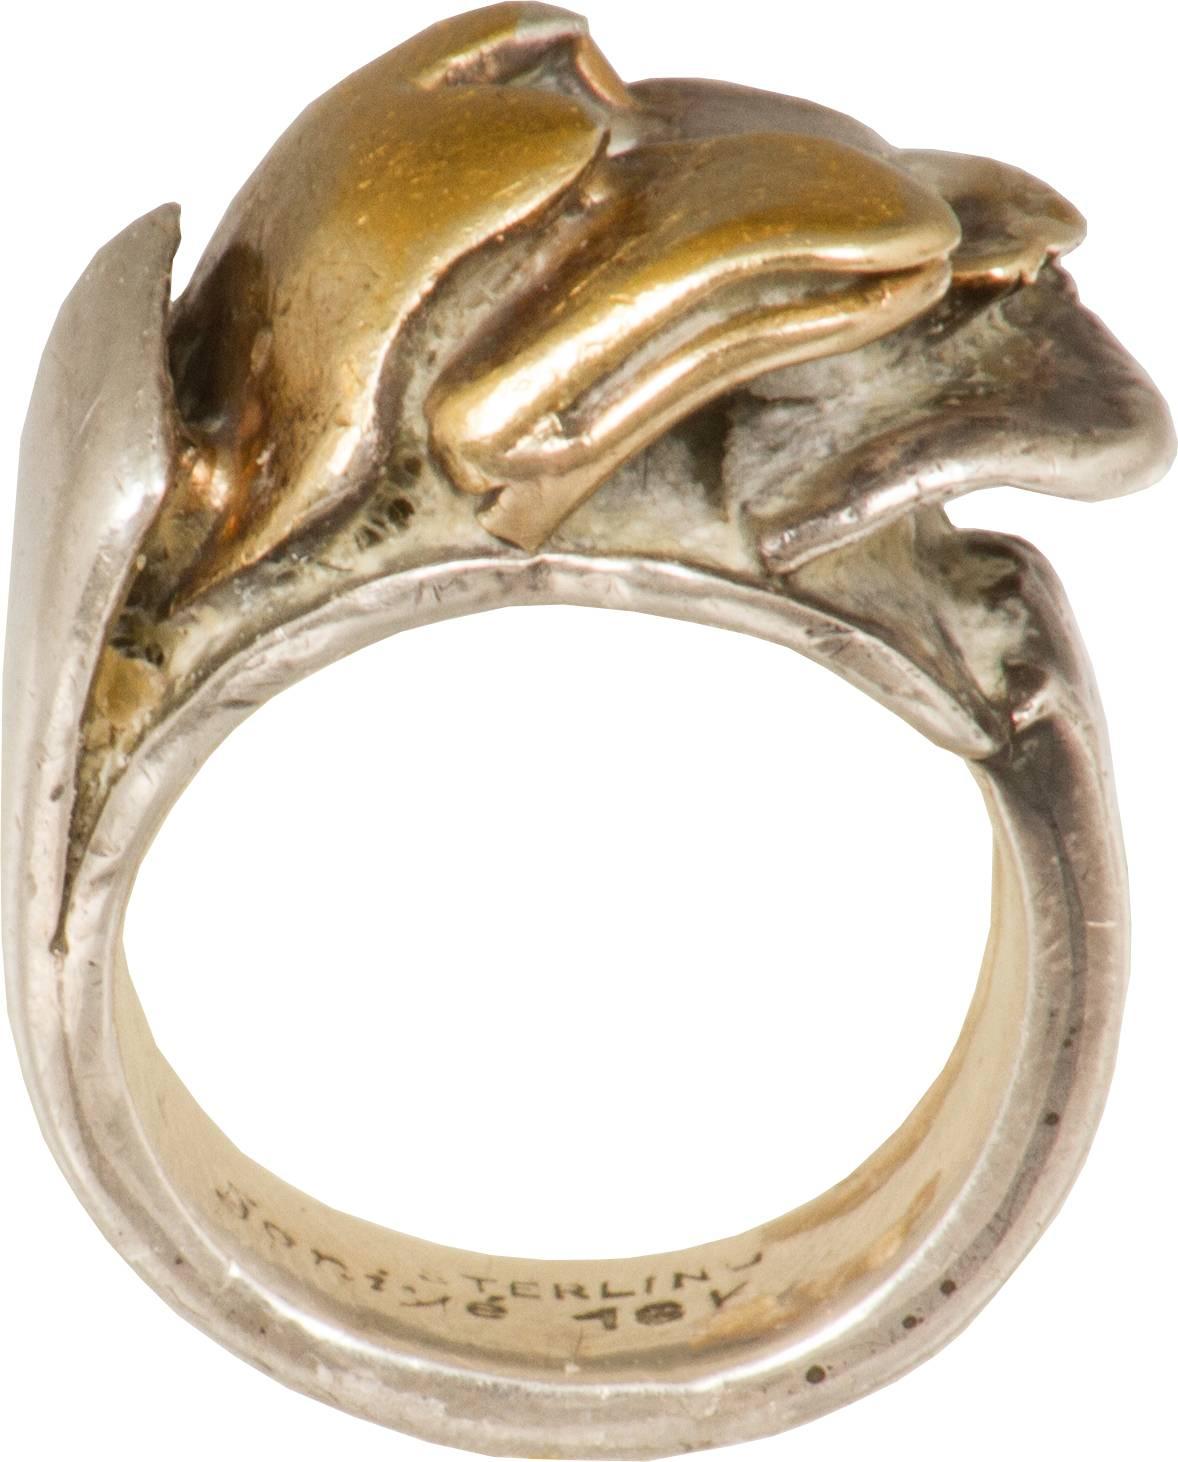 Brutalist Mid-Century Gold and Silver Ring by Miye Matsuka For Sale 1